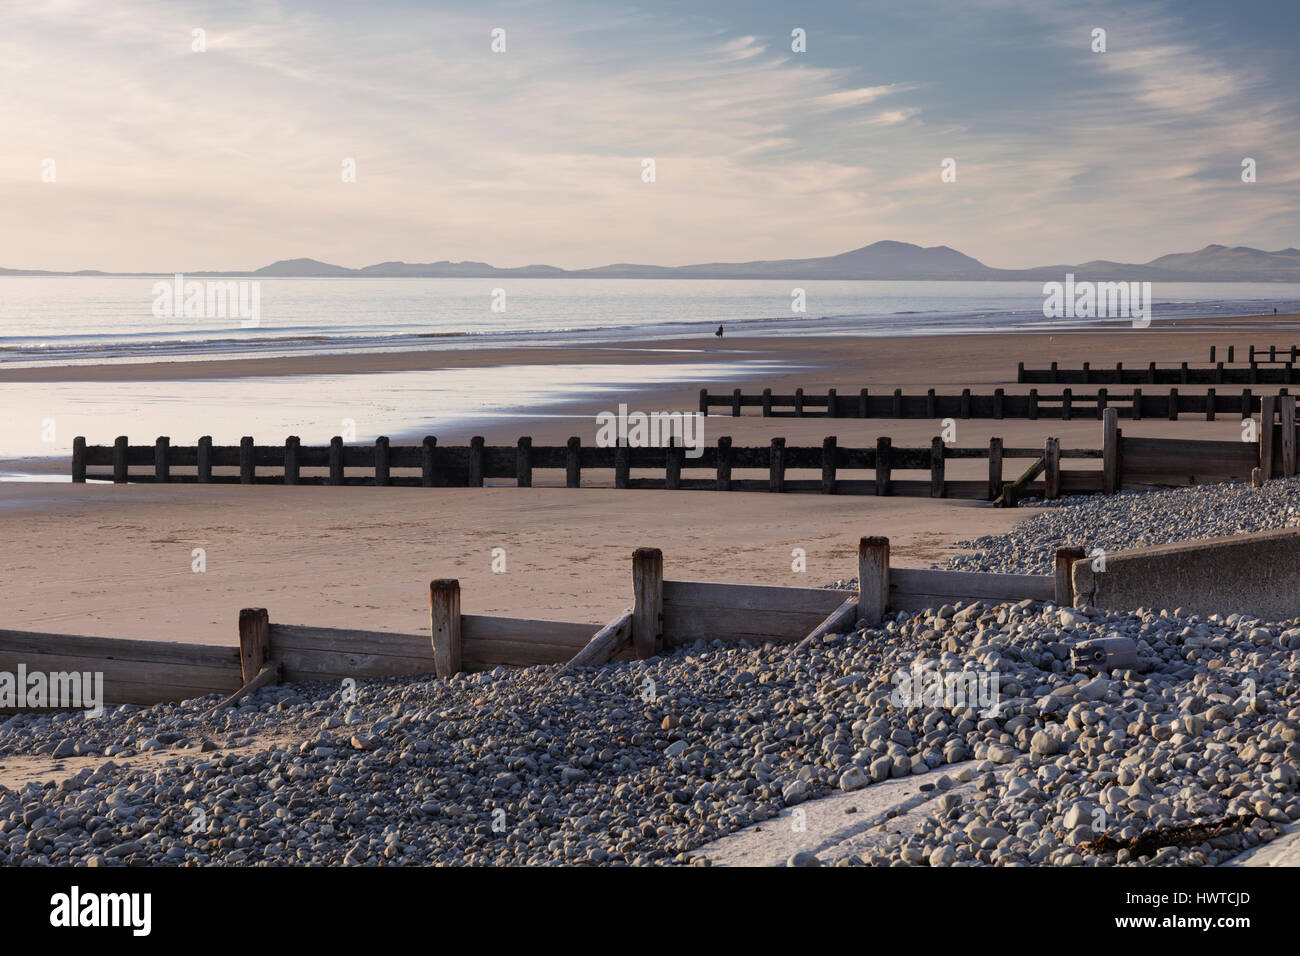 Groynes or breakwaters at Barmouth beach to protect the environment from coastal erosion Stock Photo